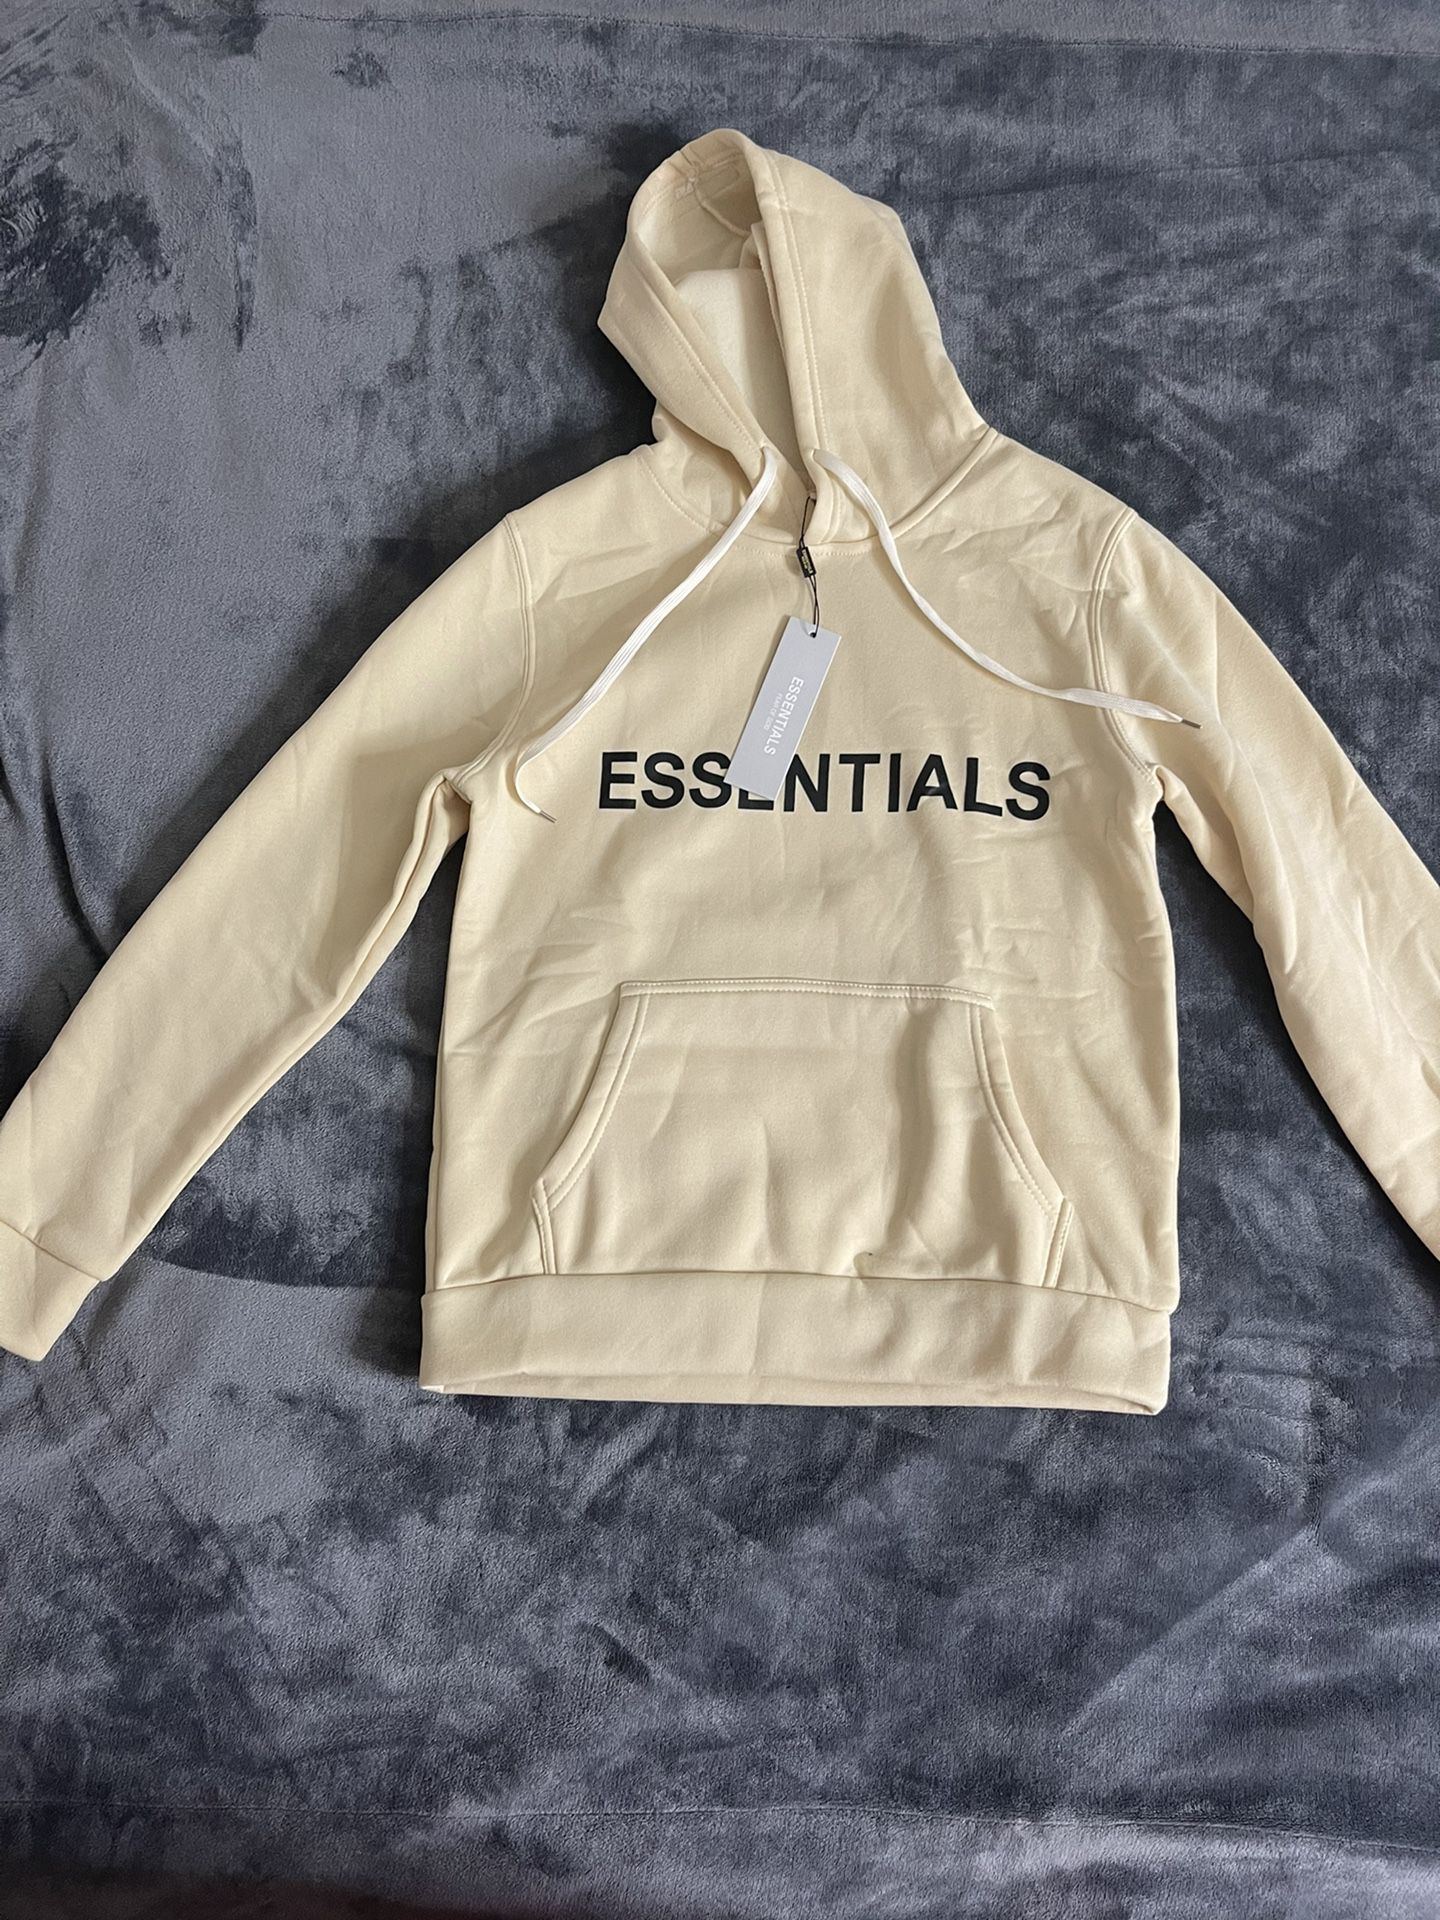 Fear Of god essentials Hoodie Size m